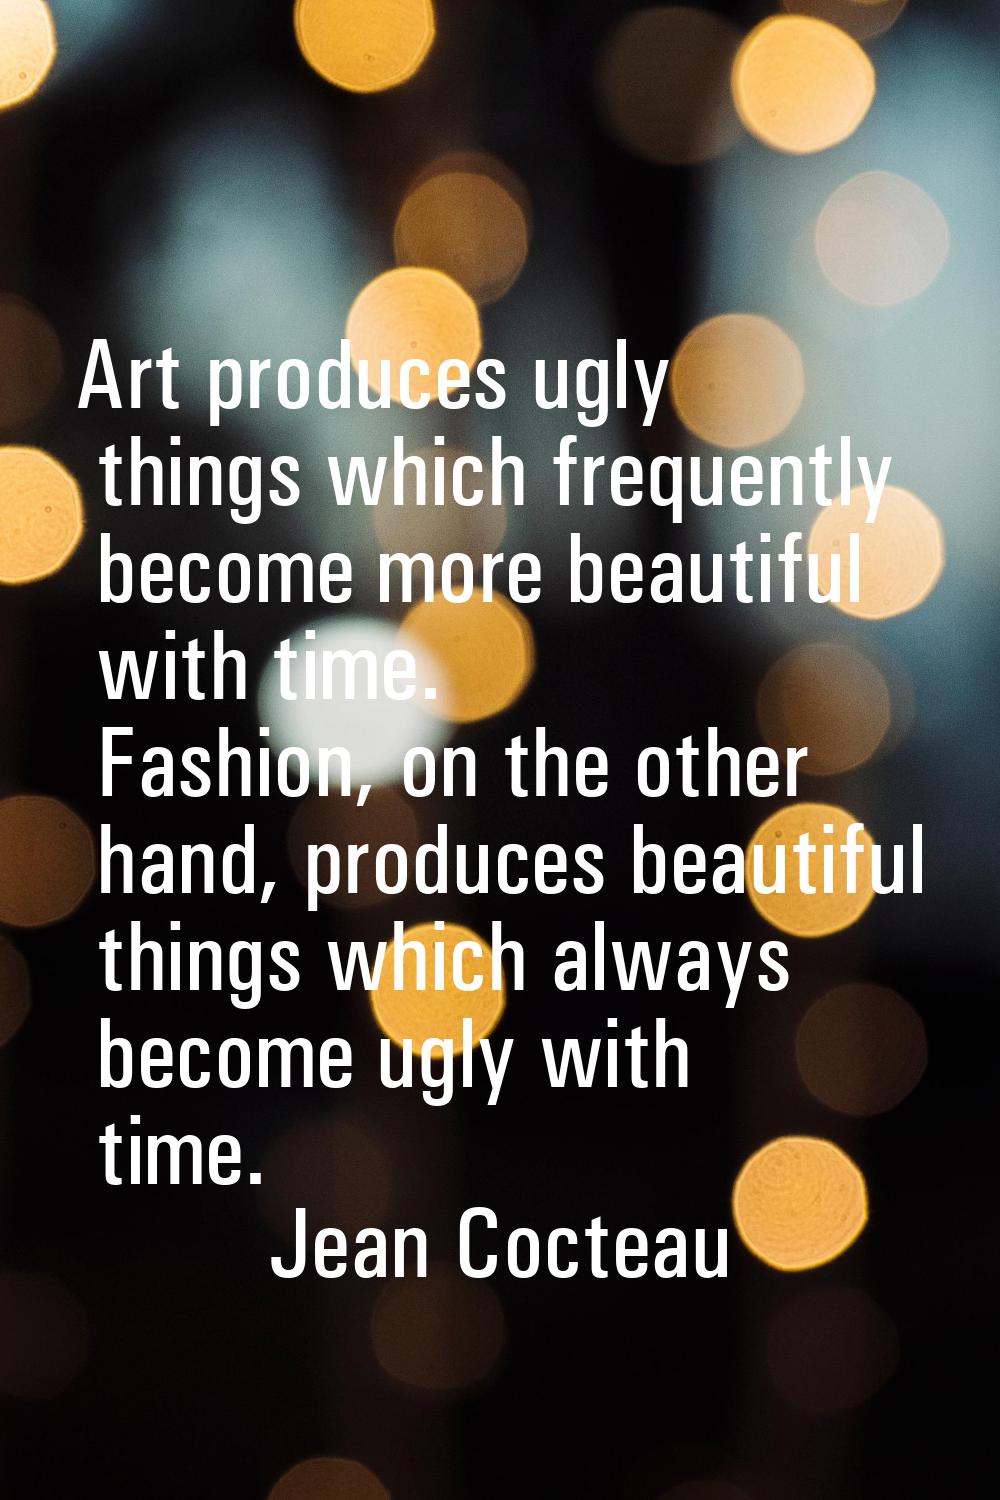 Art produces ugly things which frequently become more beautiful with time. Fashion, on the other ha